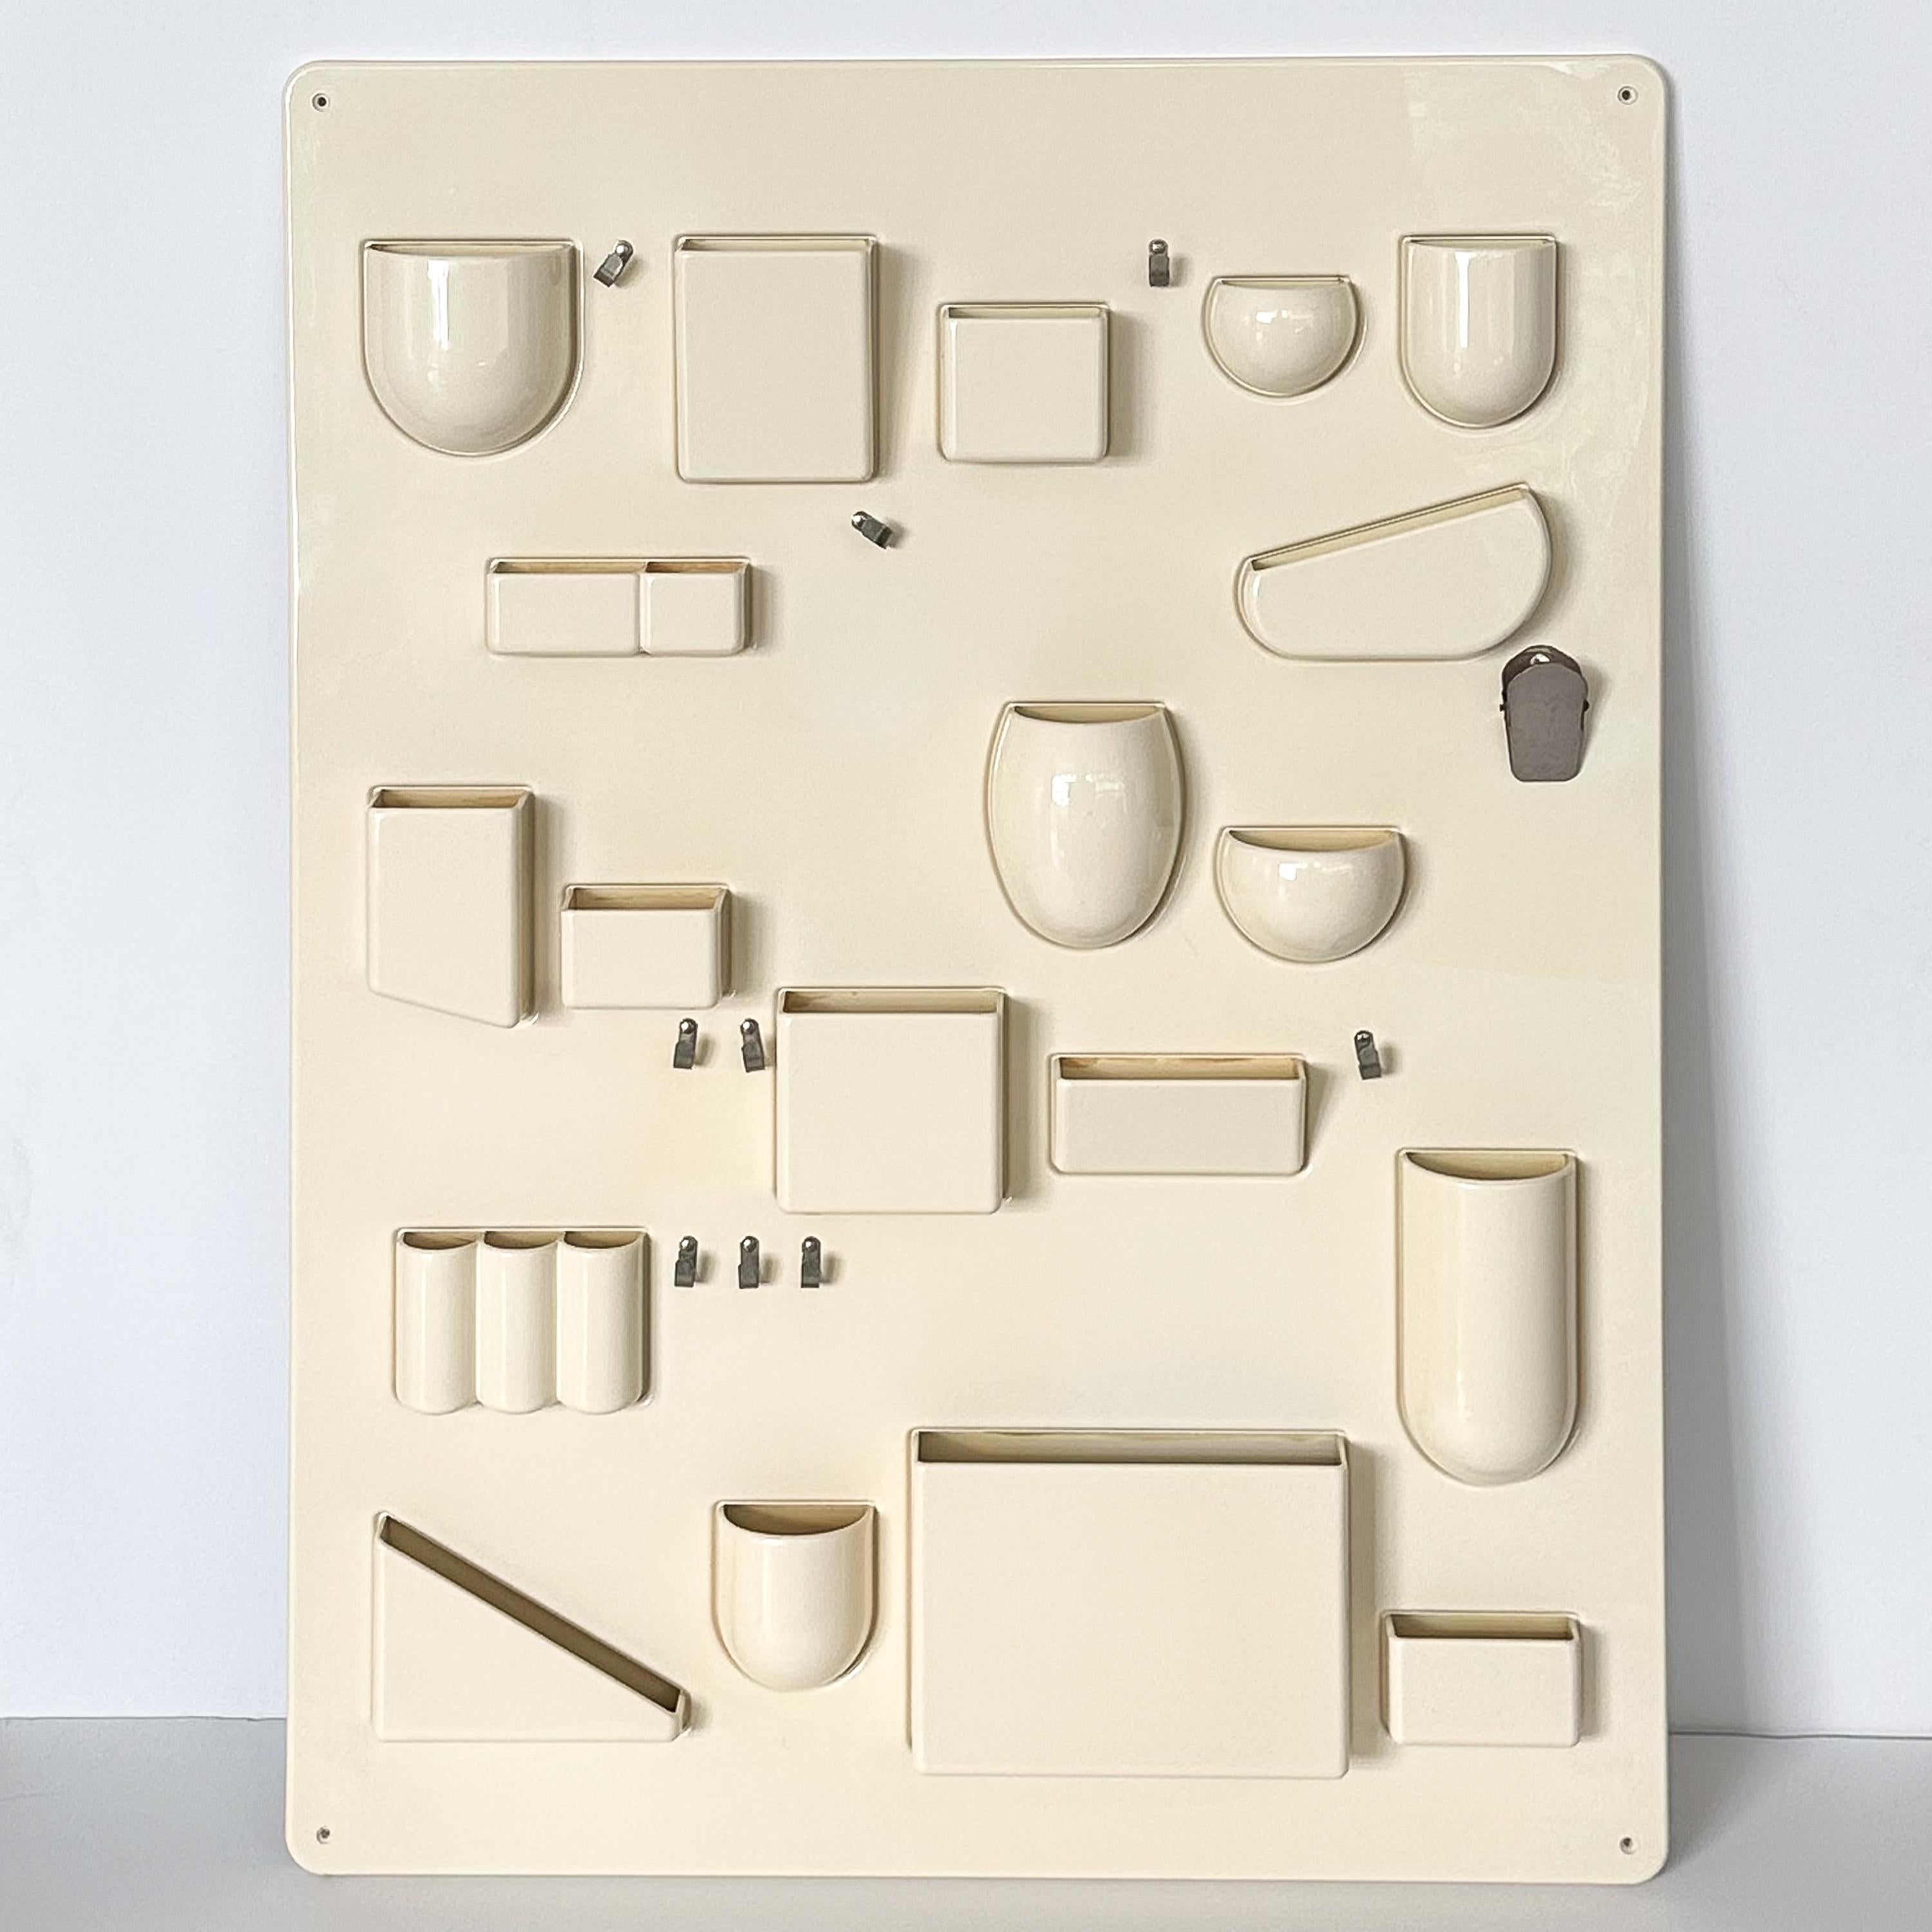 A large Uten.Silo I wall organizer by Dorothee Becker (German b. 1938) for Design M, Germany circa 1970.  Designed by Dorothee Mauer Becker in 1969.  Original first production.  Off-white / cream ABS plastic and original nickel plated metal hooks